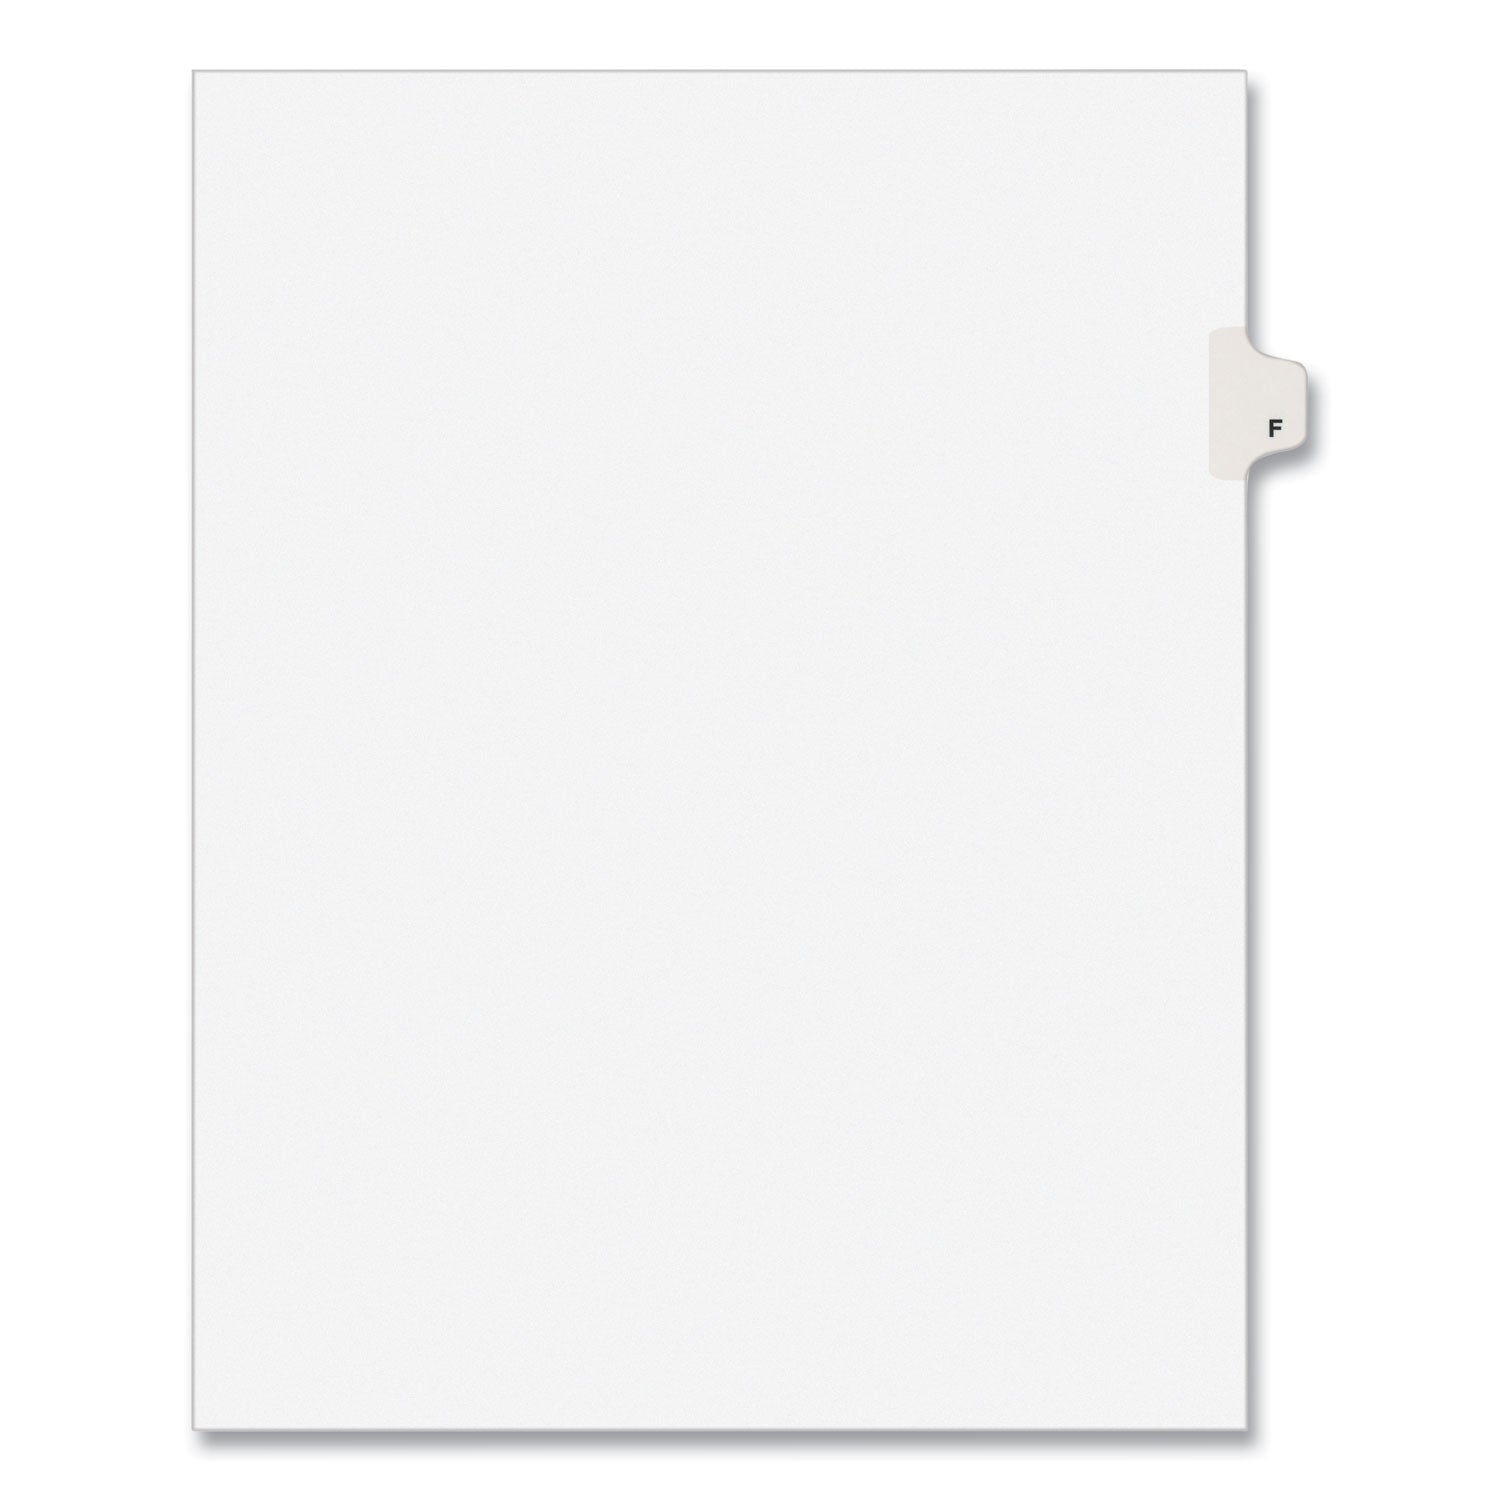 Preprinted Legal Exhibit Side Tab Index Dividers, Avery Style, 26-Tab, F, 11 x 8.5, White, 25/Pack, (1406) - 